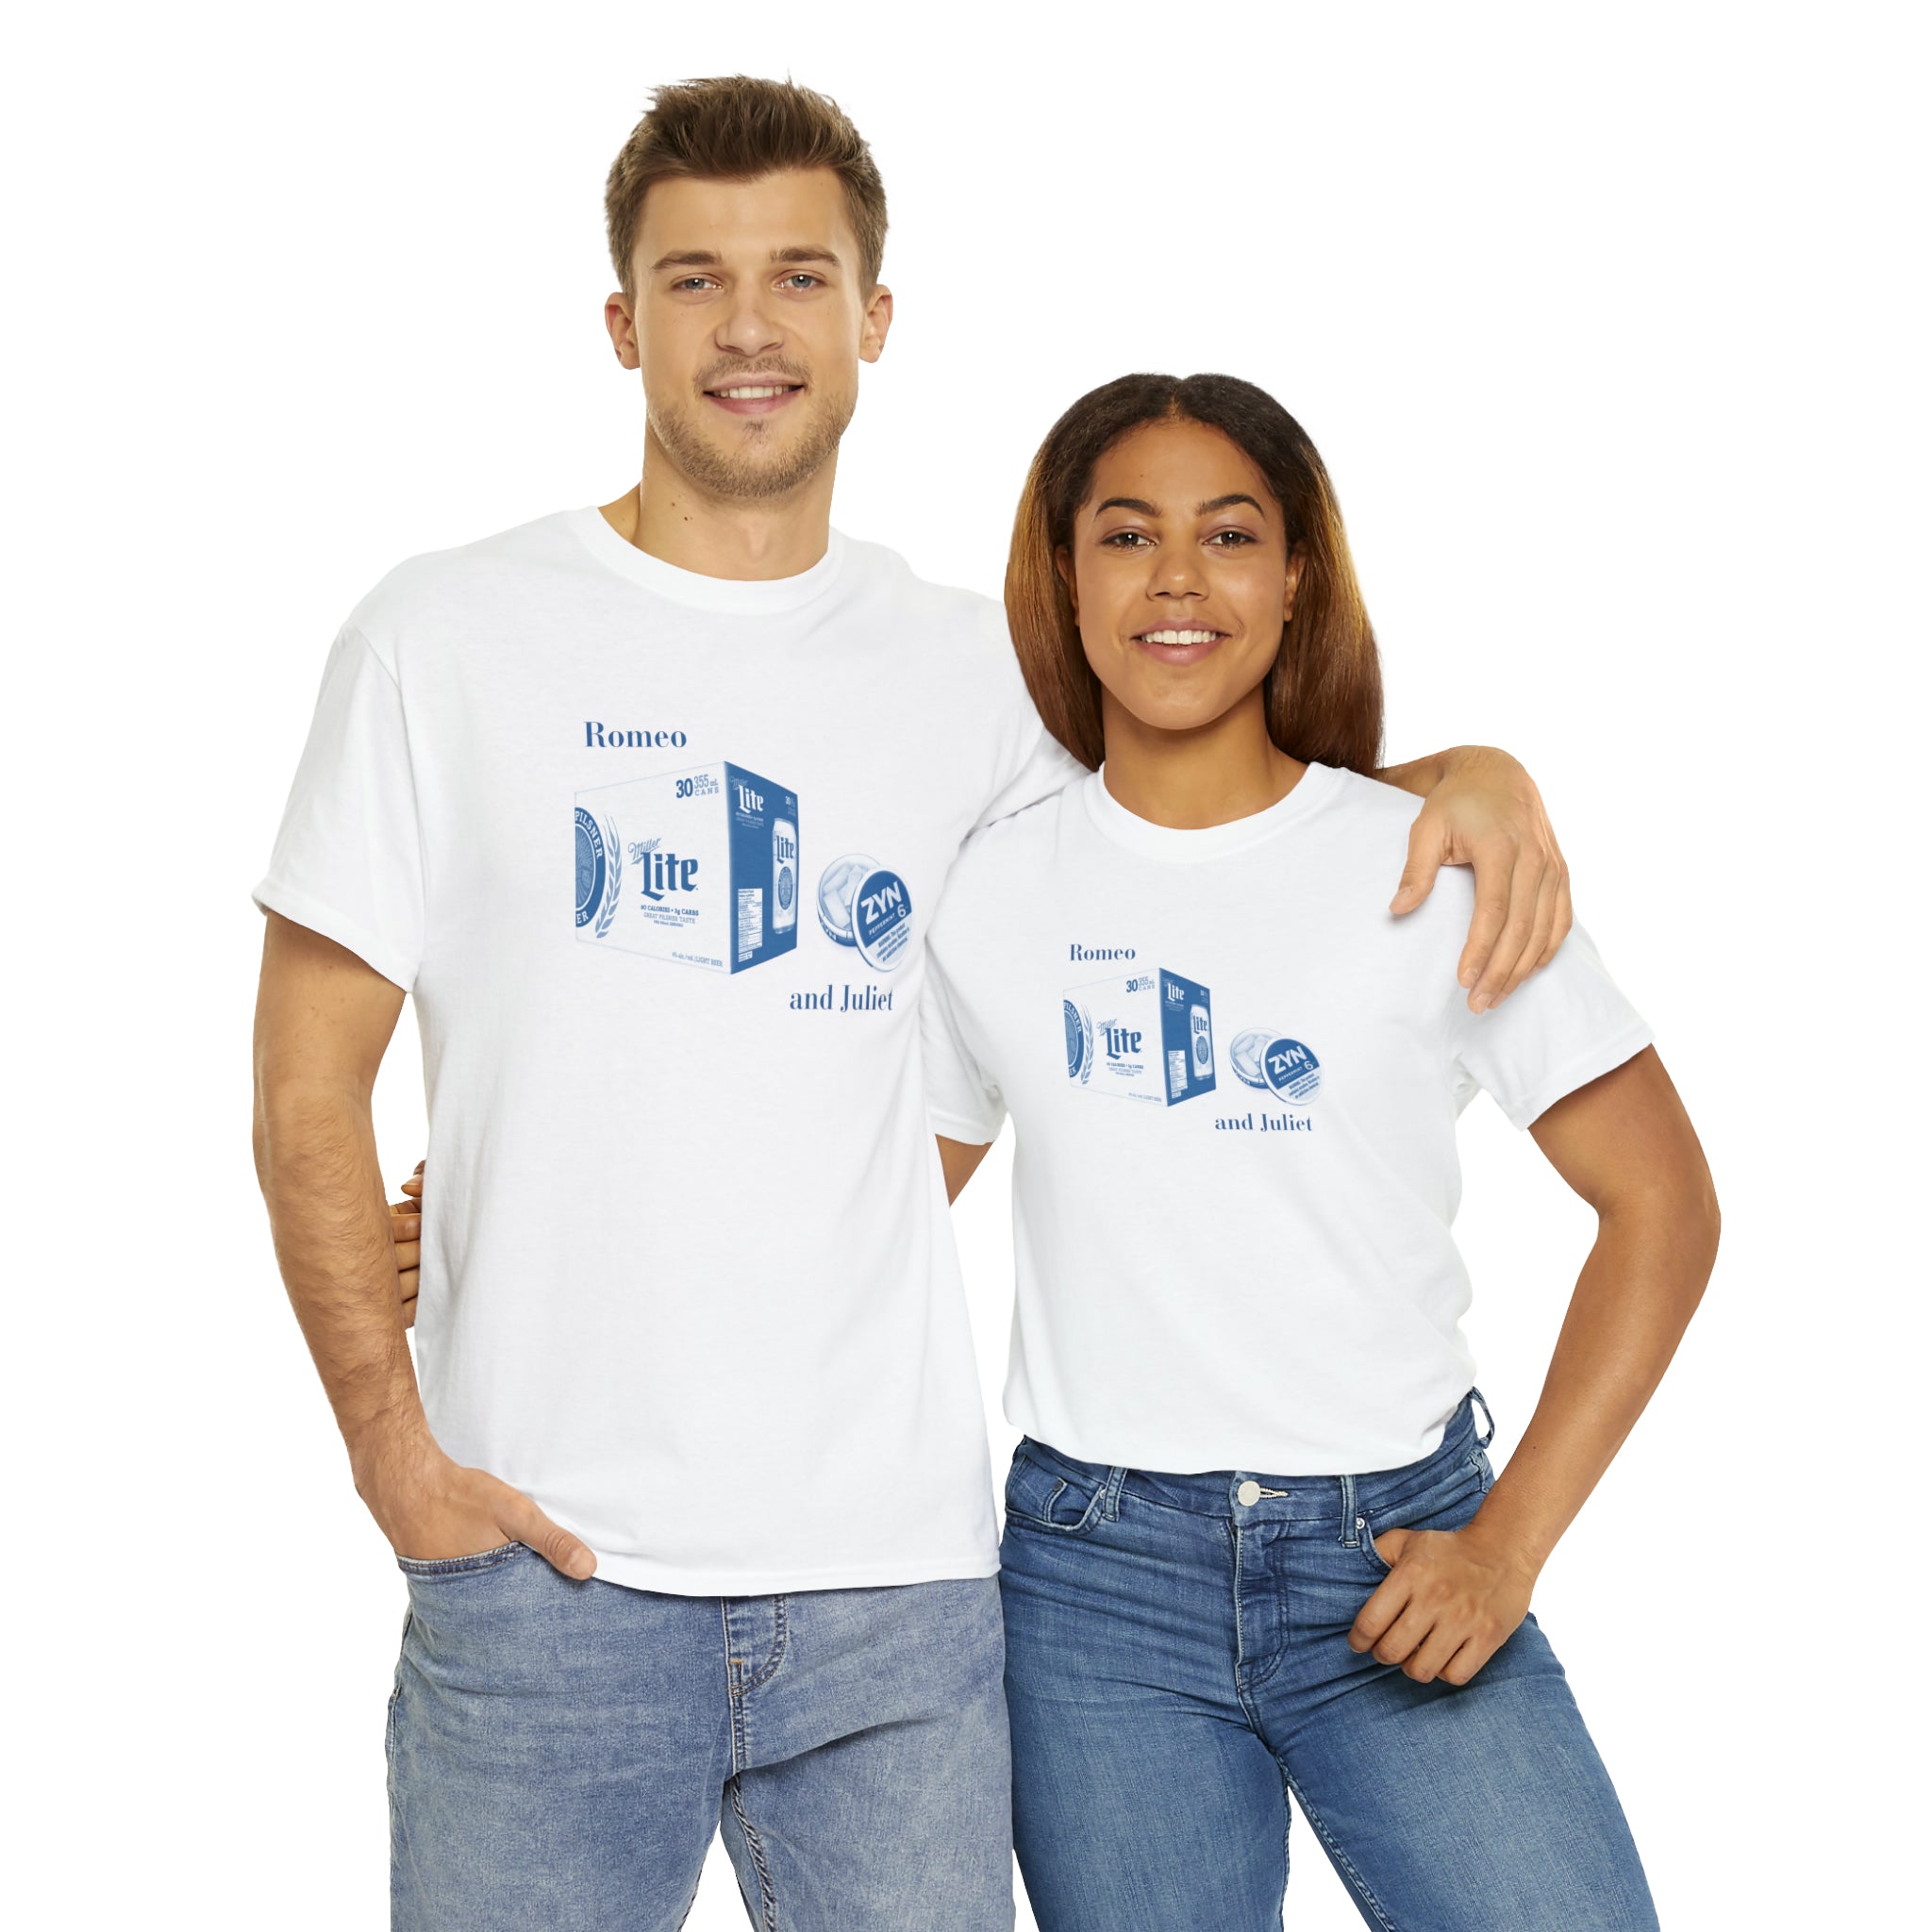 Romeo and Juliet Miller Lite and Zyns - Unisex Heavy Cotton Tee